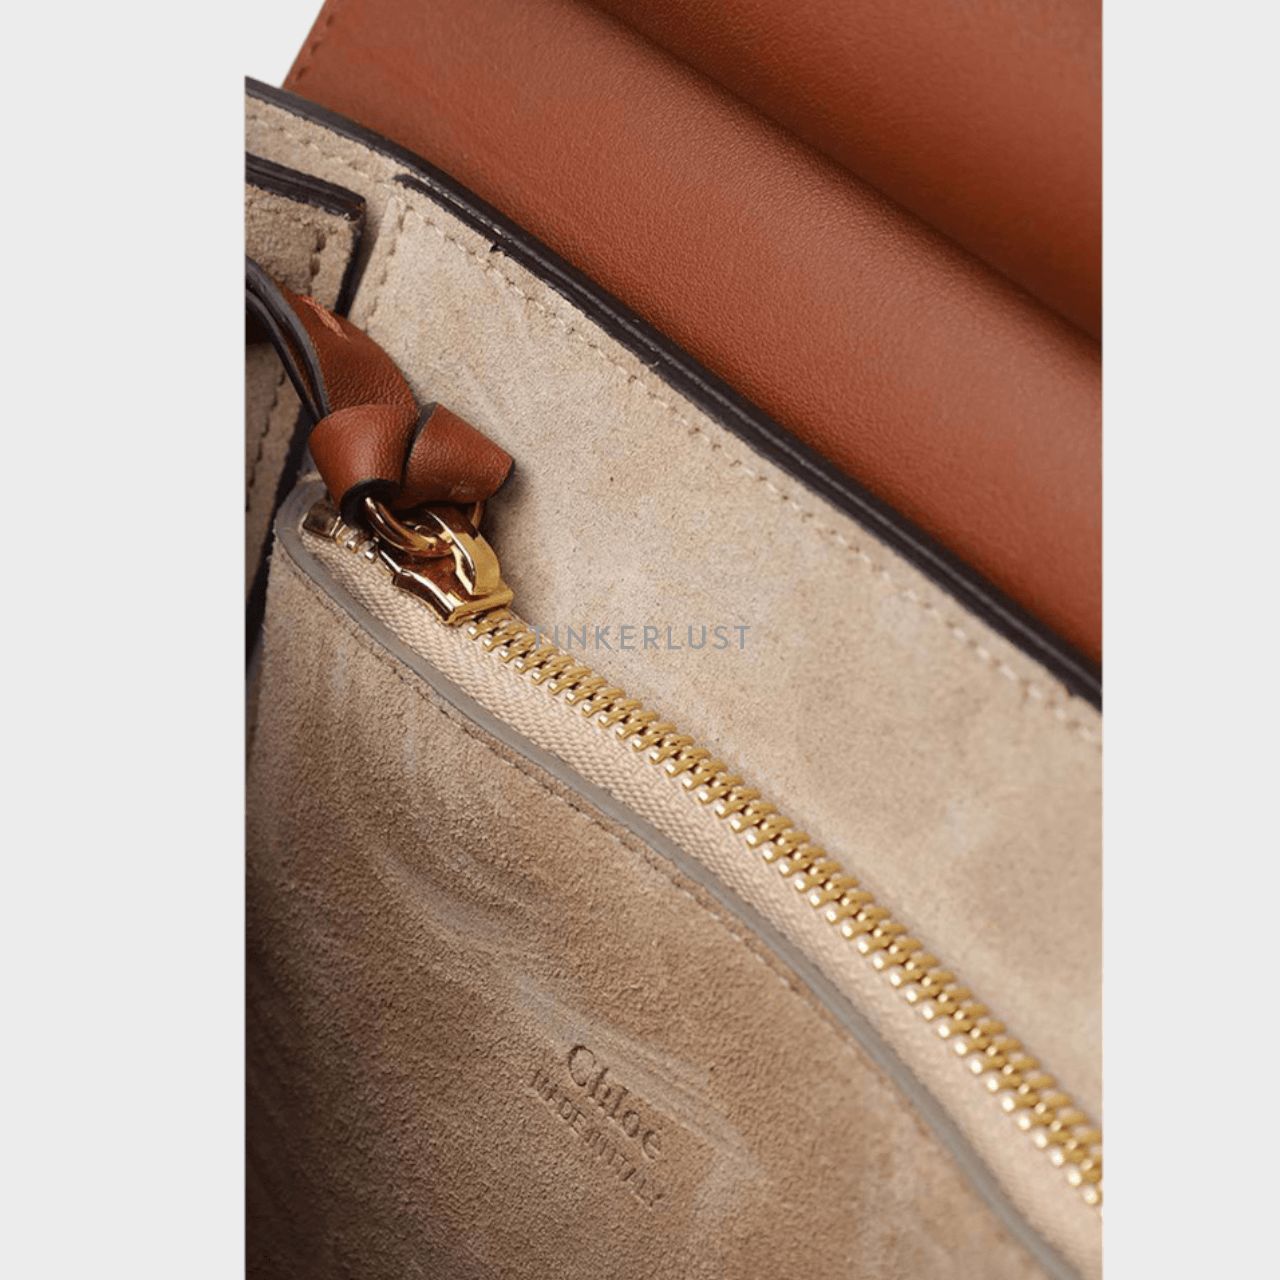 Chloe Small Faye Top Handle Bag in Classic Tobacco Smooth Leather x Suede Satchel